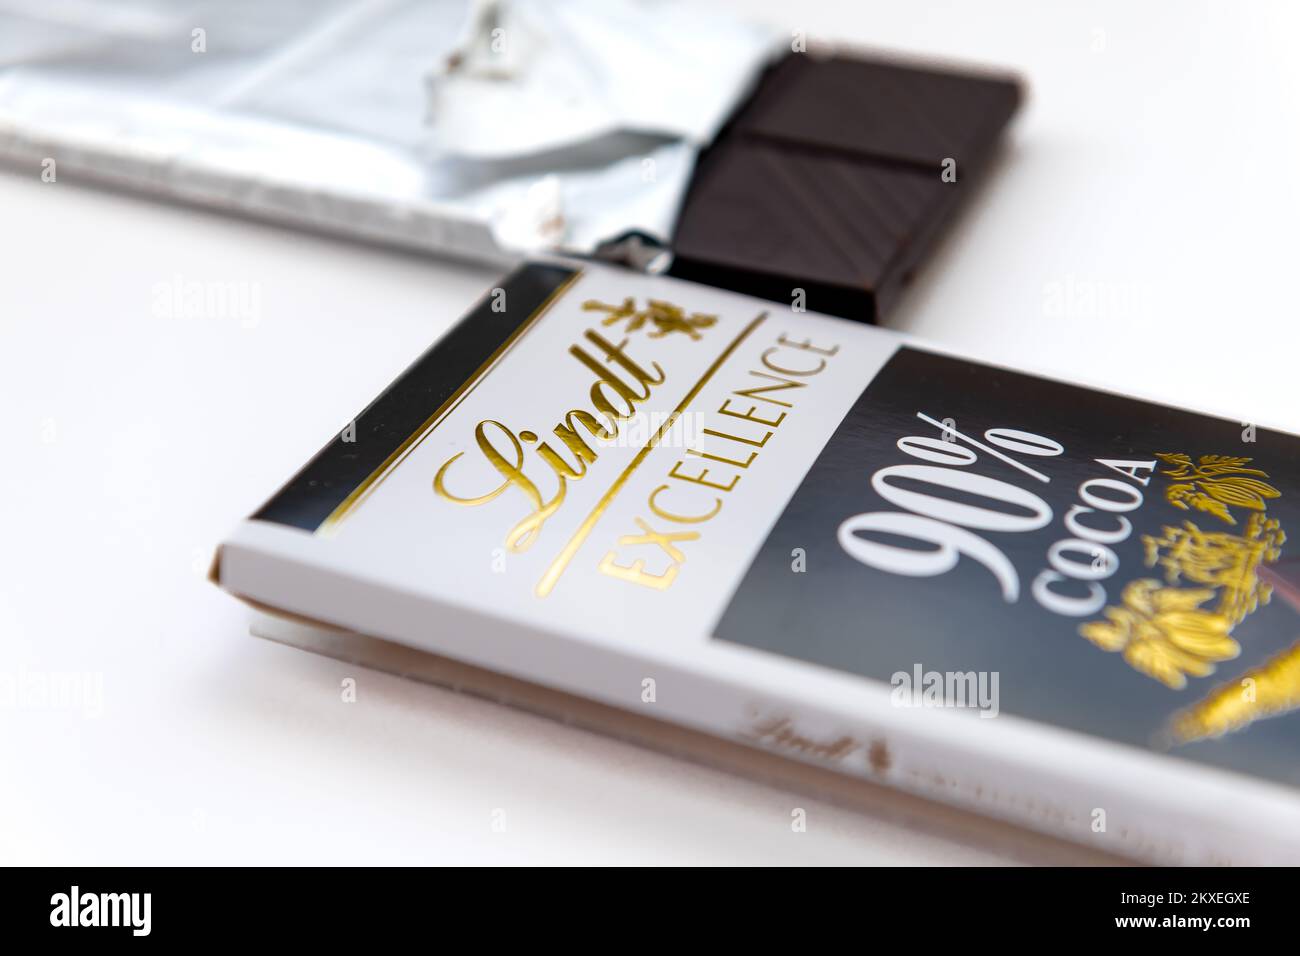 London. UK. 11.25.2022.  Close up of a packet of Lindt dark chocolate. Stock Photo